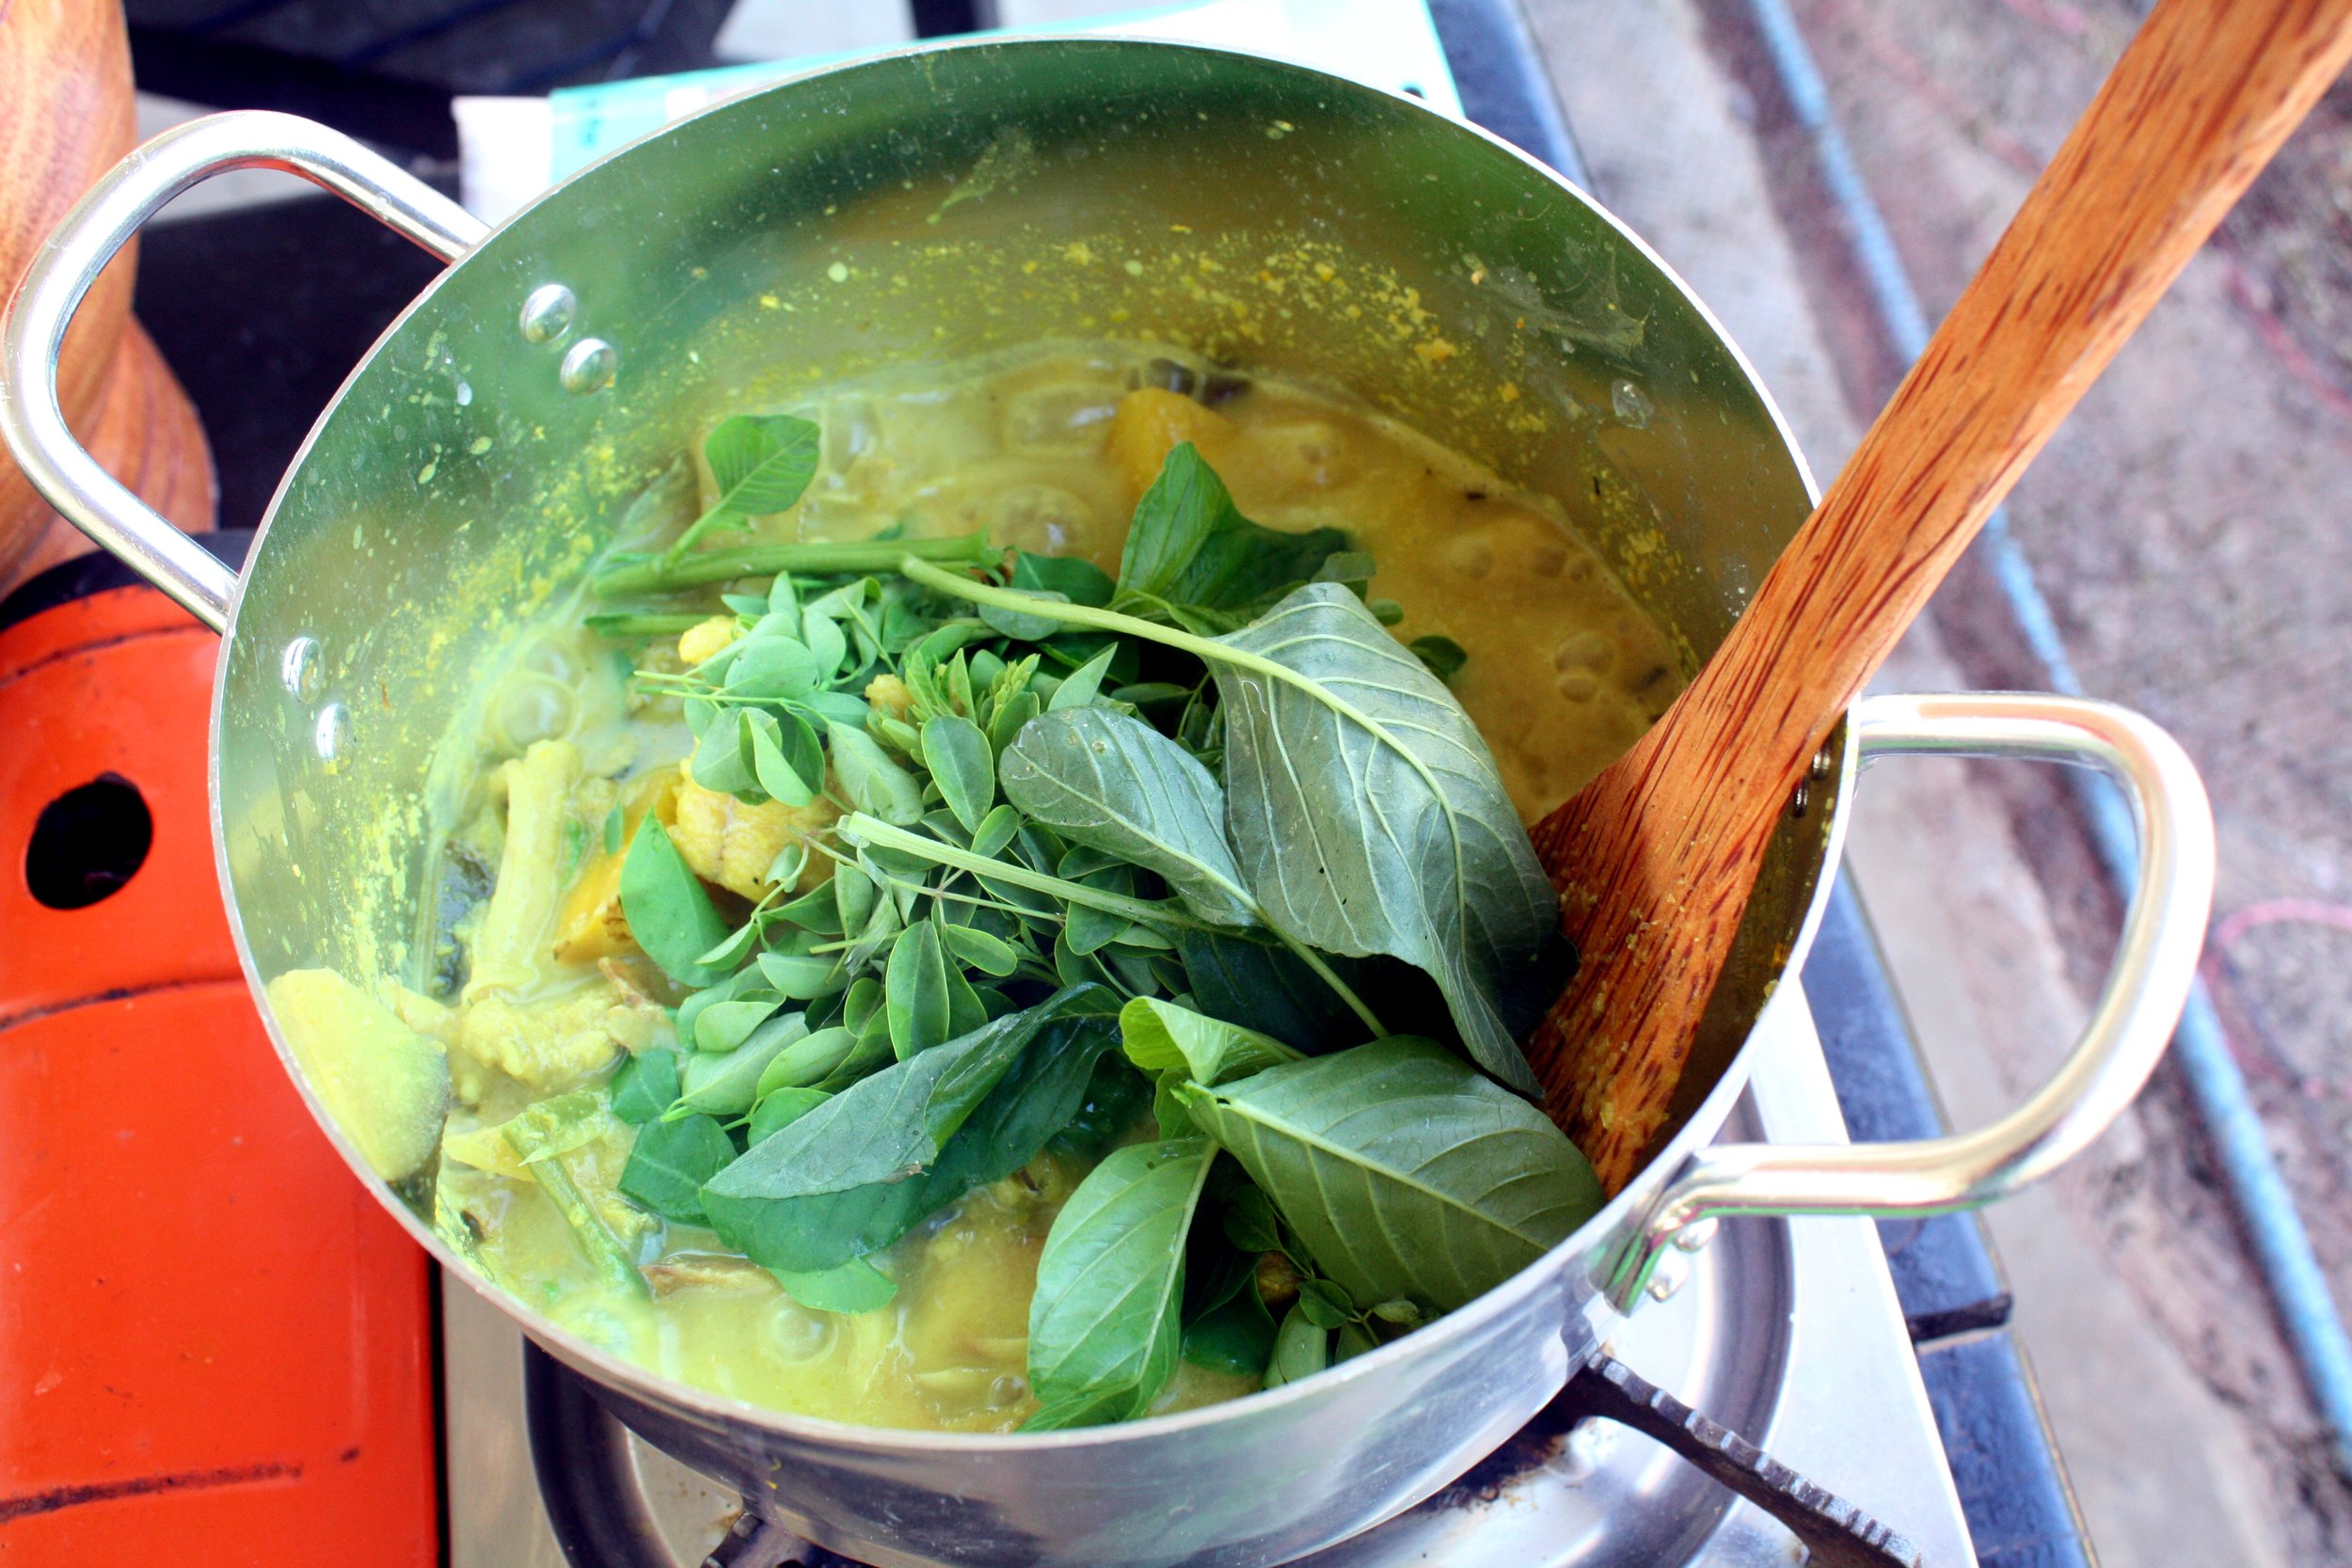  Our Samlor Kakor (Fish and Vegetable Coconut Soup) in the making.&nbsp; 